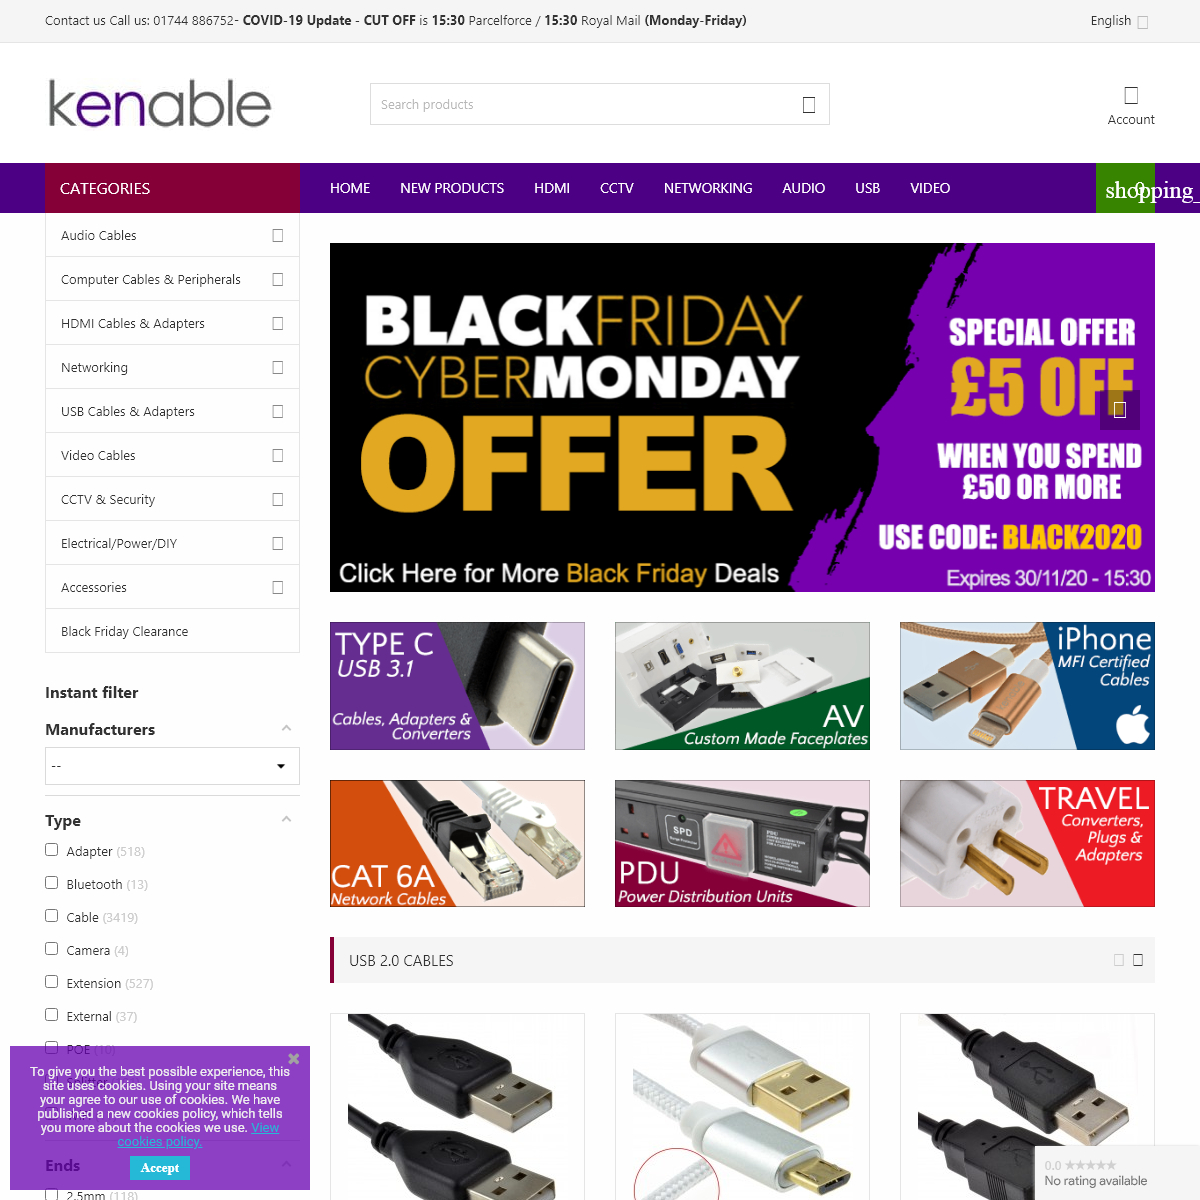 A complete backup of kenable.co.uk